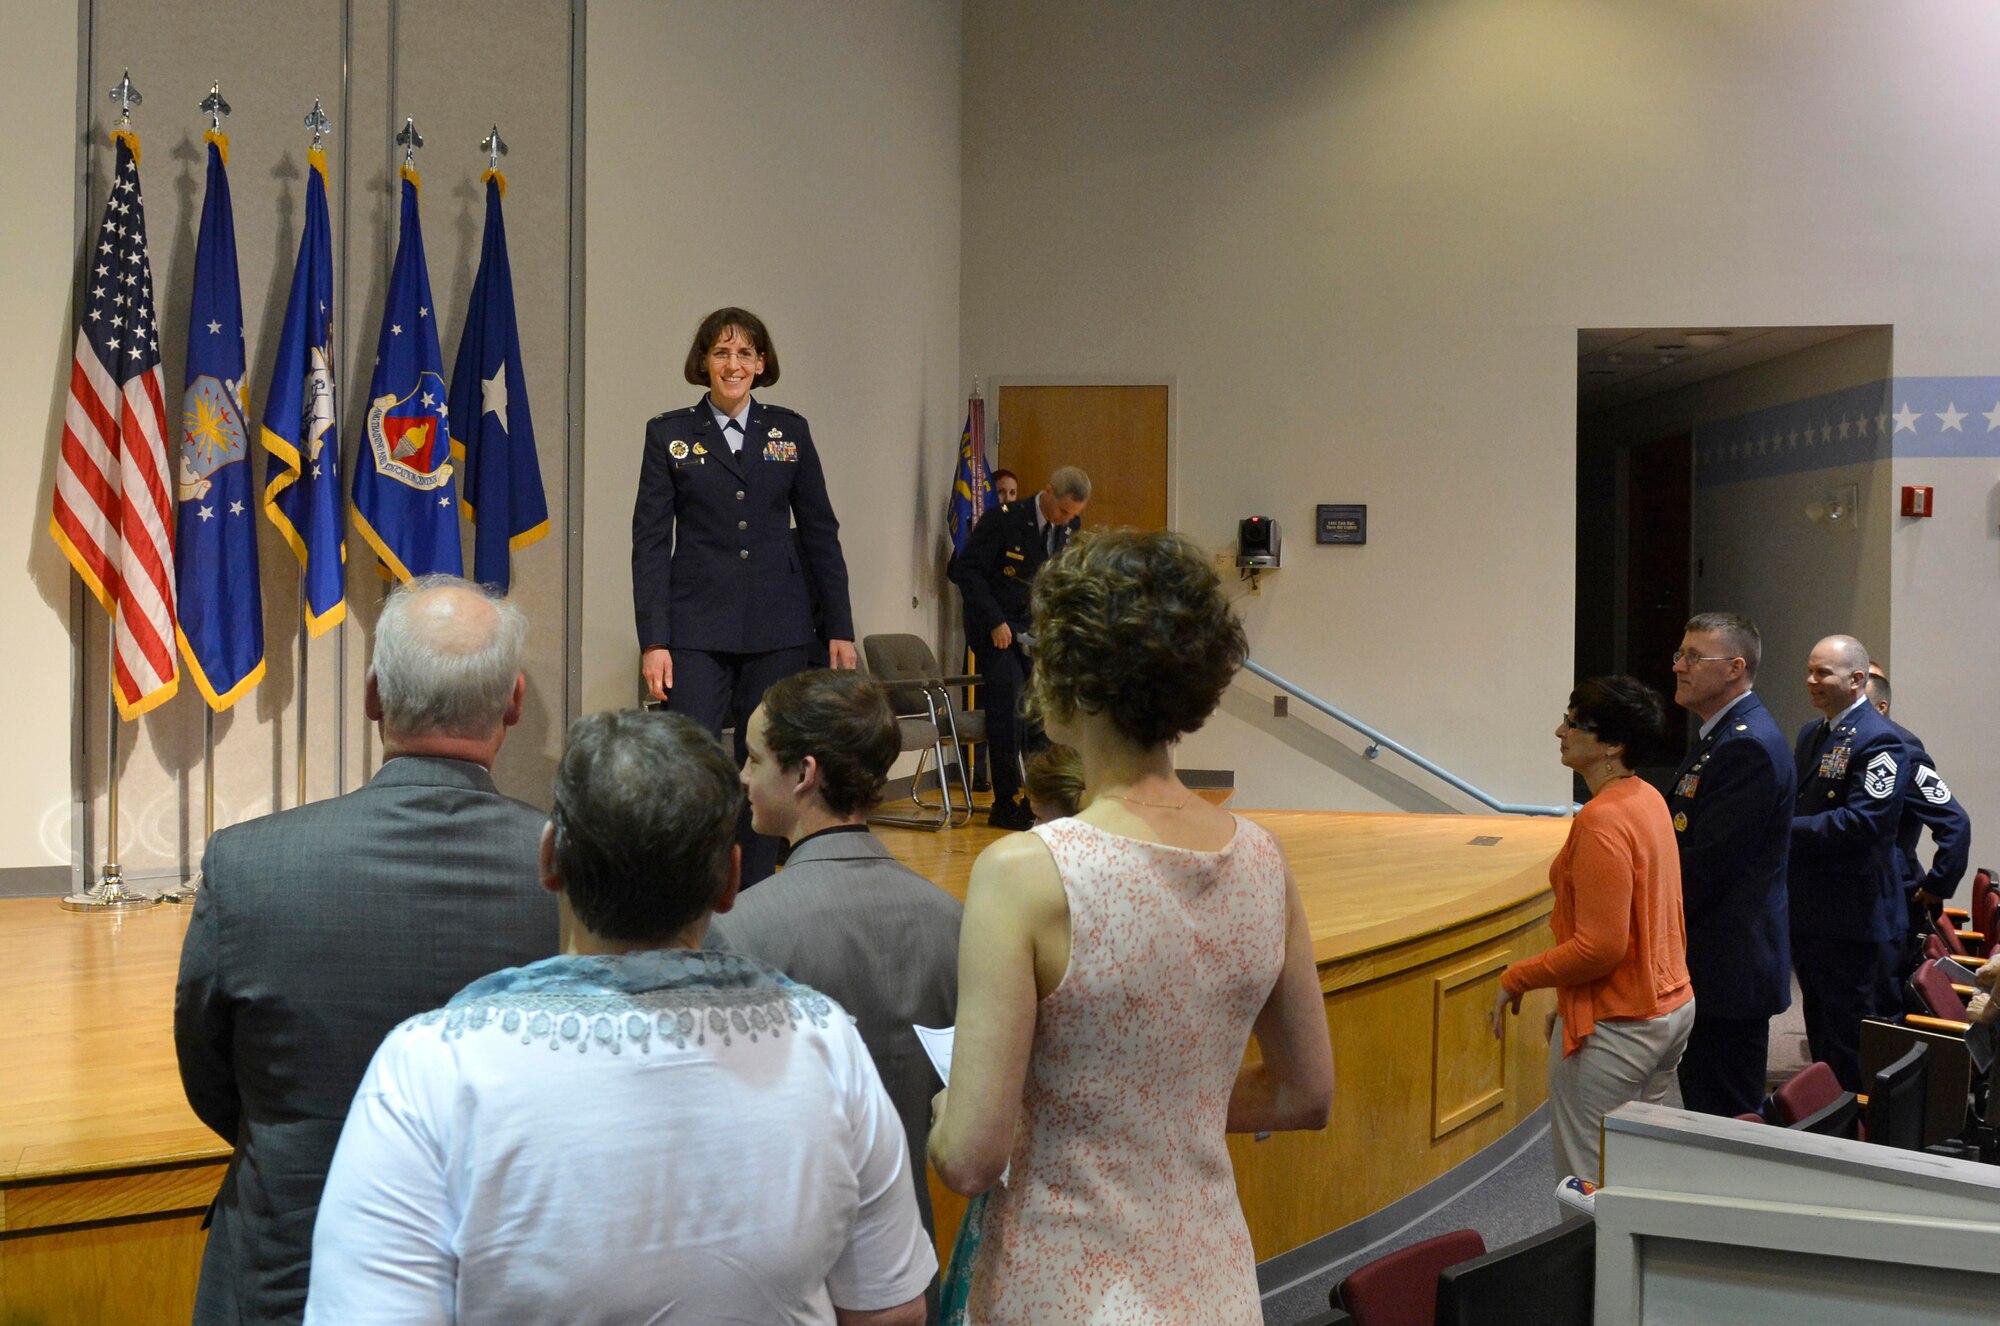 McGHEE TYSON AIR NATIONAL GUARD BASE, Tenn. - Col. Jessica Meyeraan becomes the 12th commander of the I.G. Brown Training and Education Center during a change-of-command ceremony held in Spruance Hall on May 22, 2014. (U.S. Air National Guard photo by Master Sgt. Kurt Skoglund/Released)